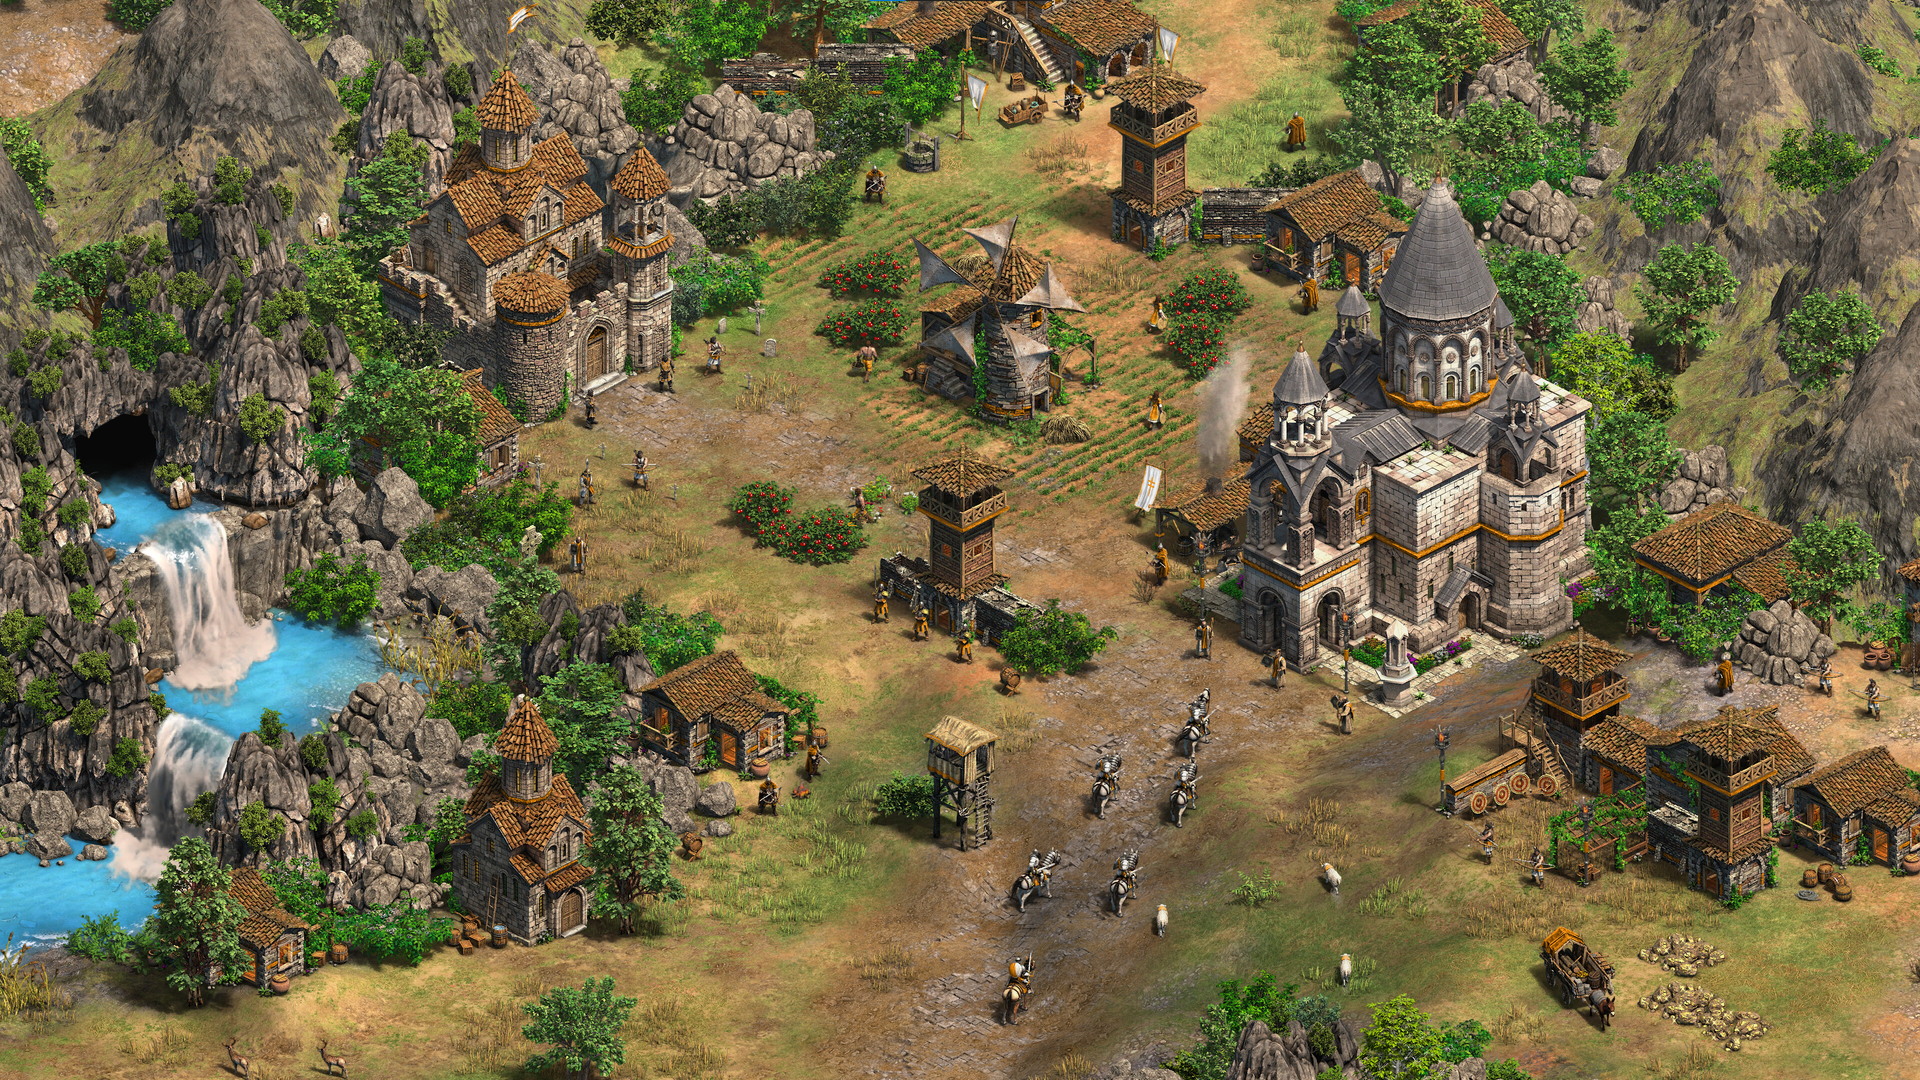 Age of Empires II: Definitive Edition - The Mountain Royals - screenshot 3